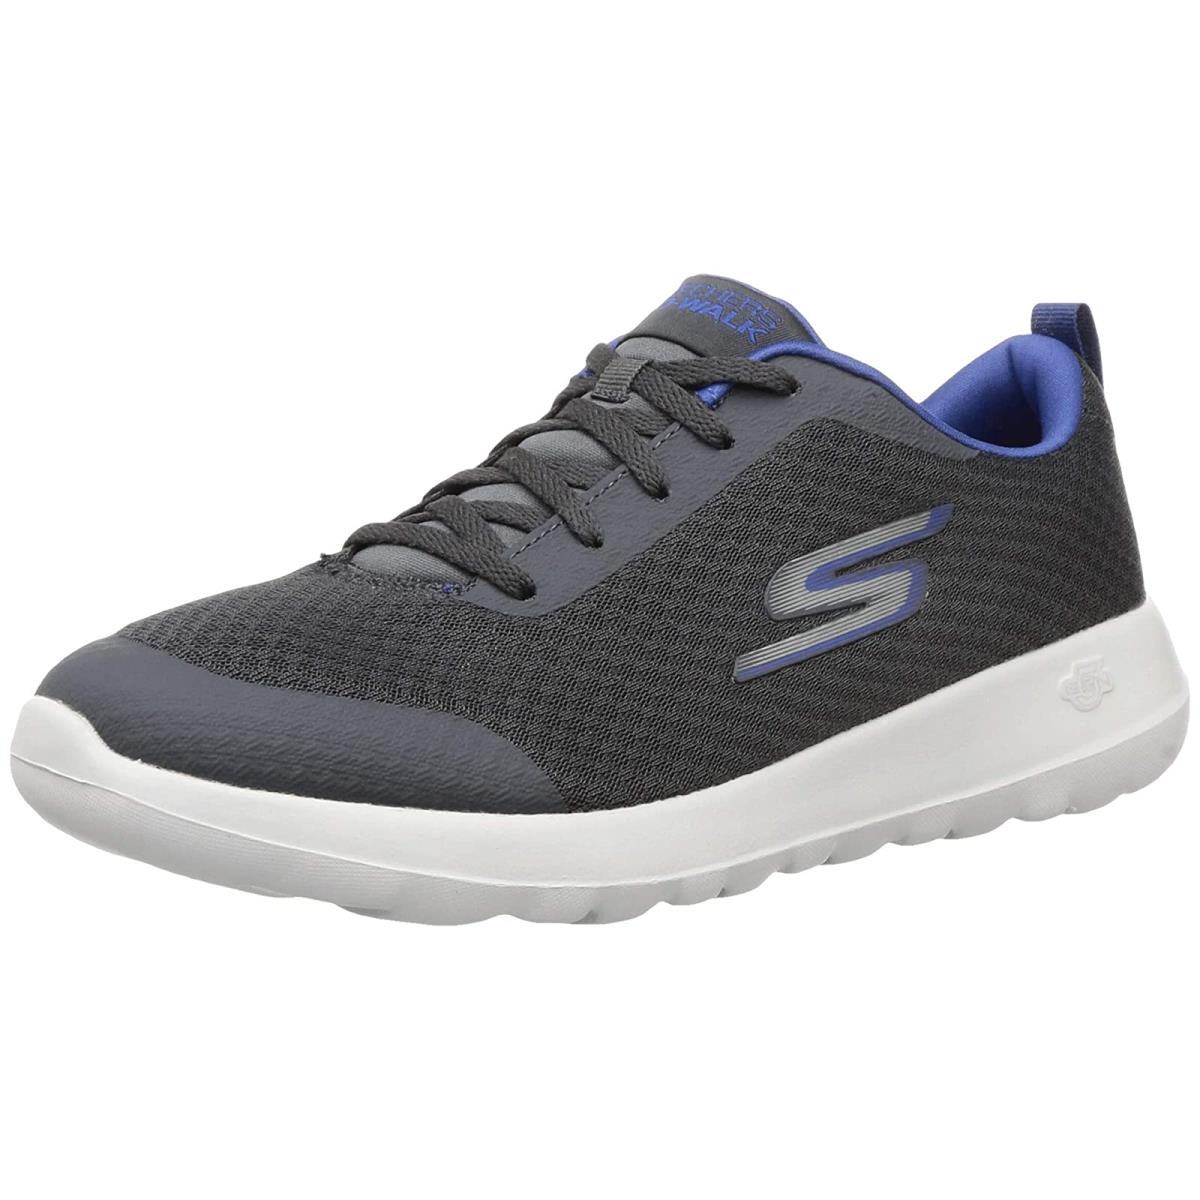 Man`s Sneakers Athletic Shoes Skechers Performance Go Walk Max Charcoal/Blue